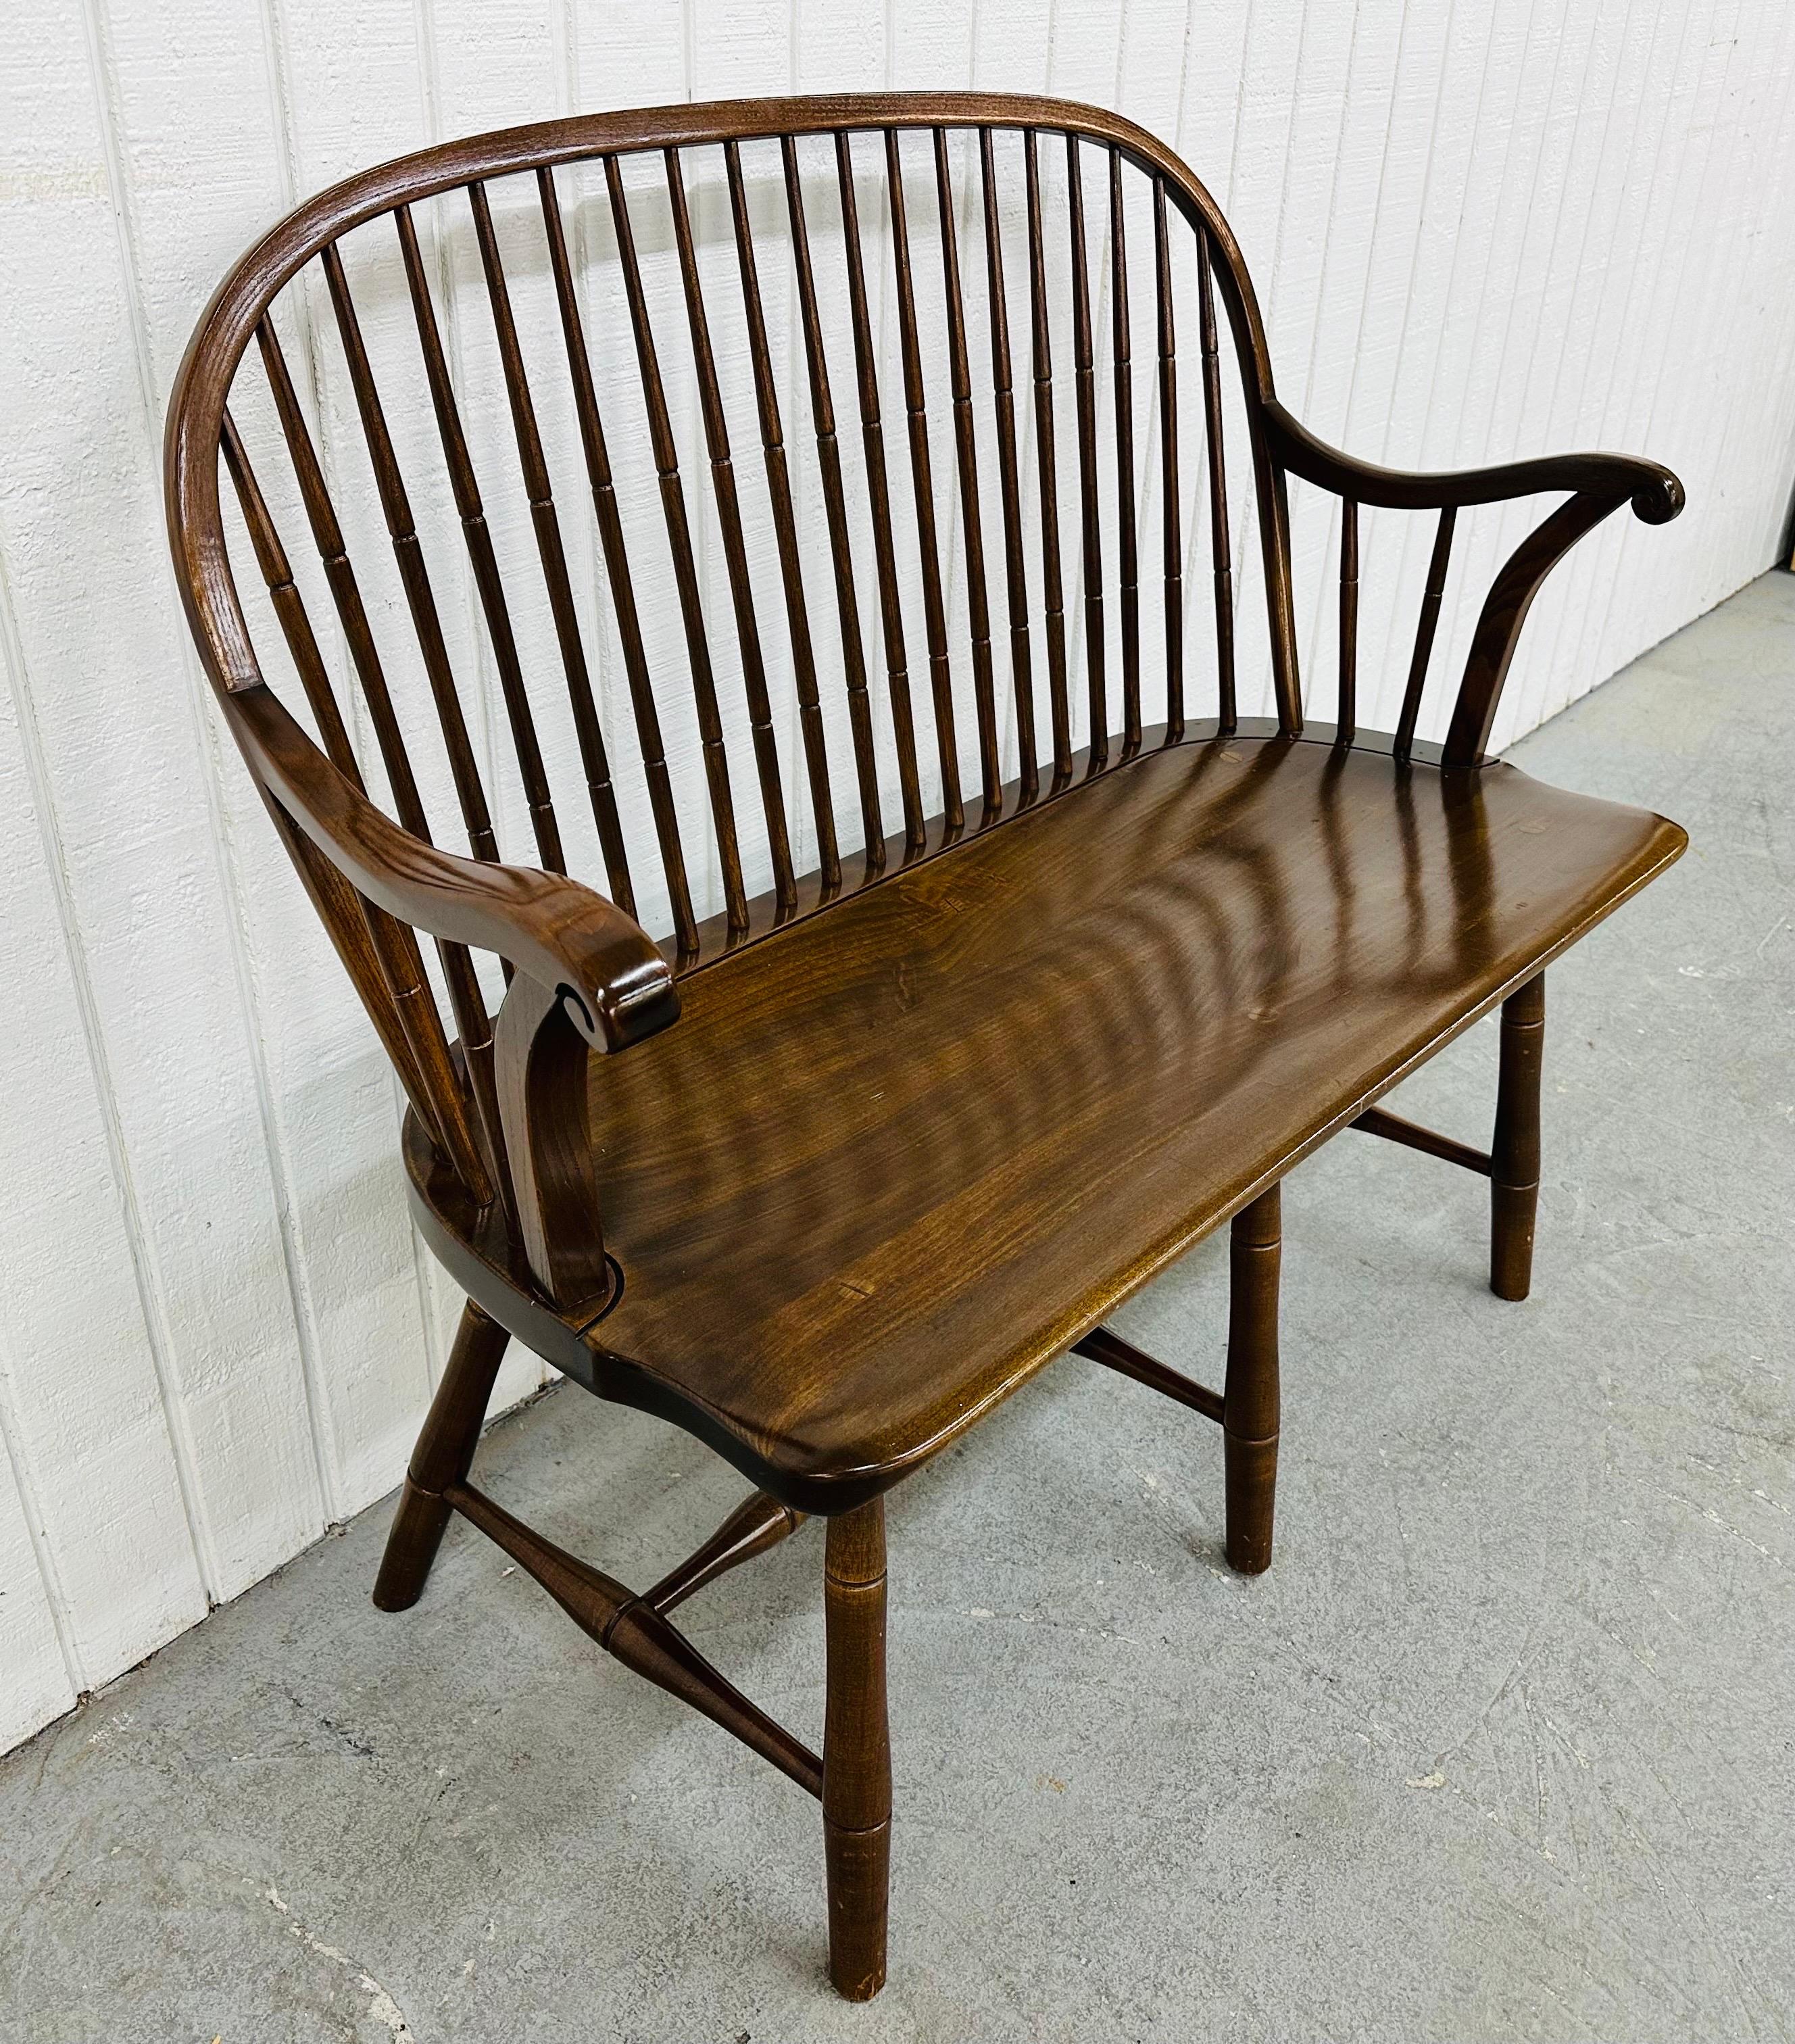 This listing is for a Vintage Duckloe & Bros. Windsor Style Cherry Bench. Featuring a Windsor style spindle back design, curved arms on each side, six legs with stretcher base, cherry wood bench seat, and a beautiful walnut finish.